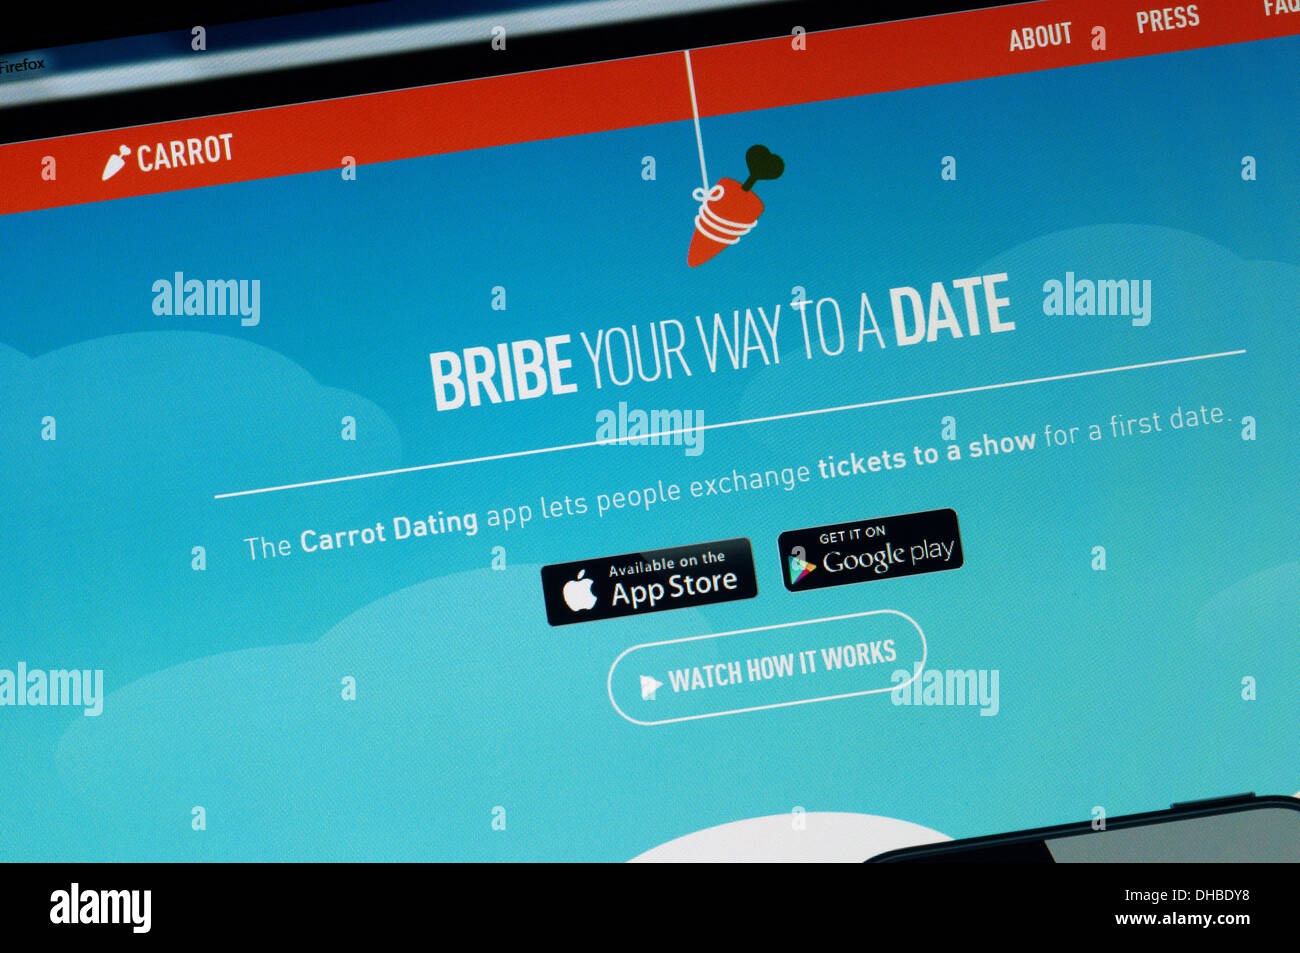 The website of the Carrot online dating app. Stock Photo